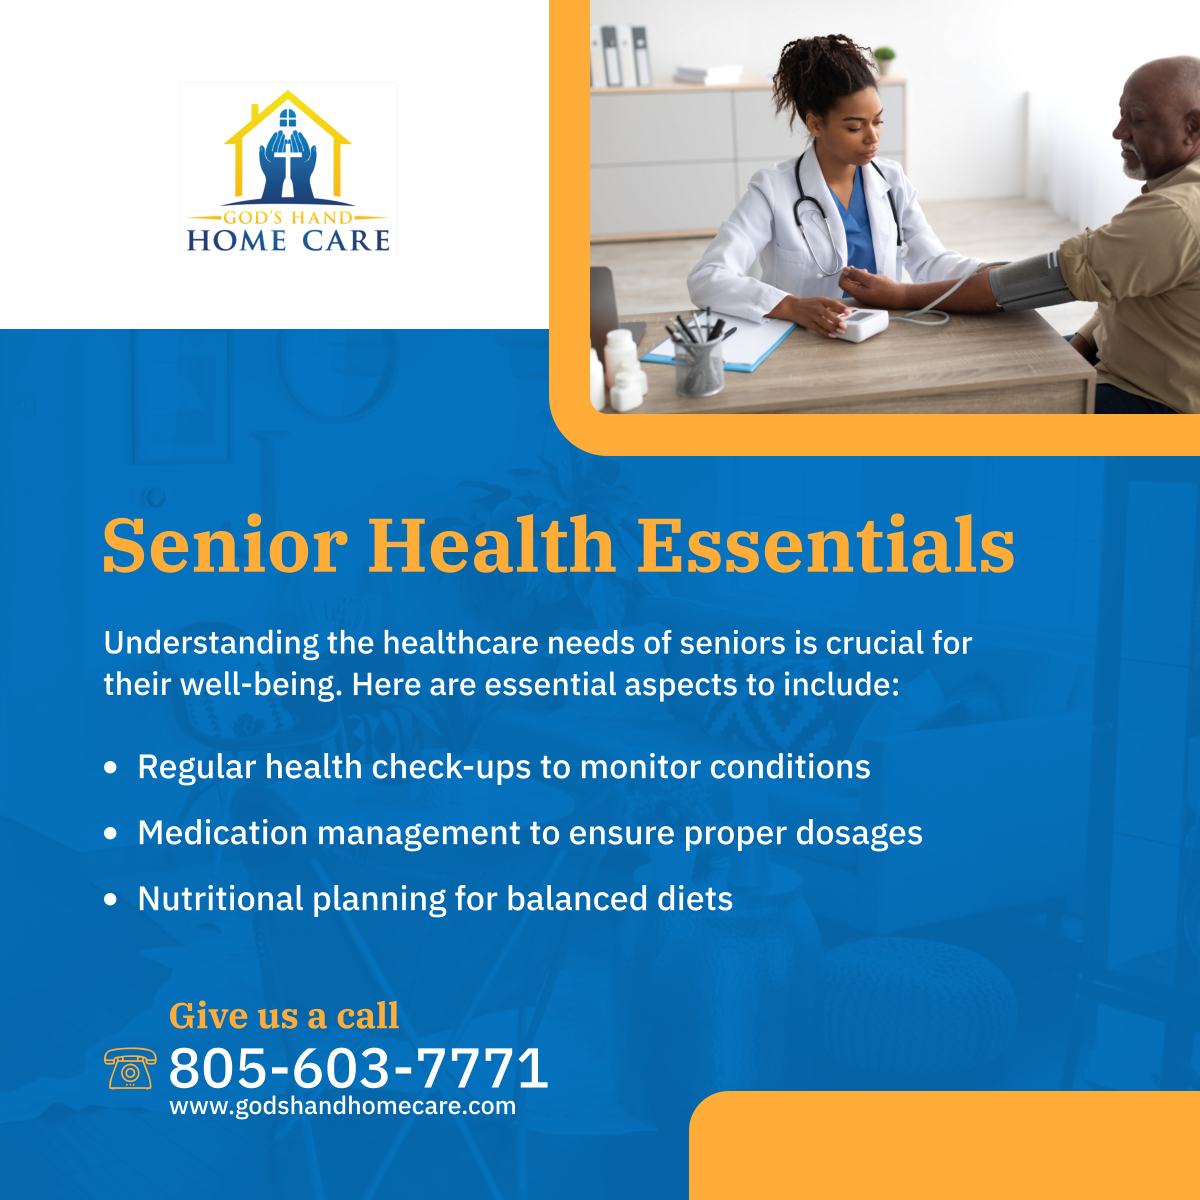 Keeping our seniors healthy involves more than just attention; it requires an informed approach to their unique healthcare needs. Dive into these vital aspects to ensure their well-being. 

#OxnardCA #HomeCare #SeniorHealth